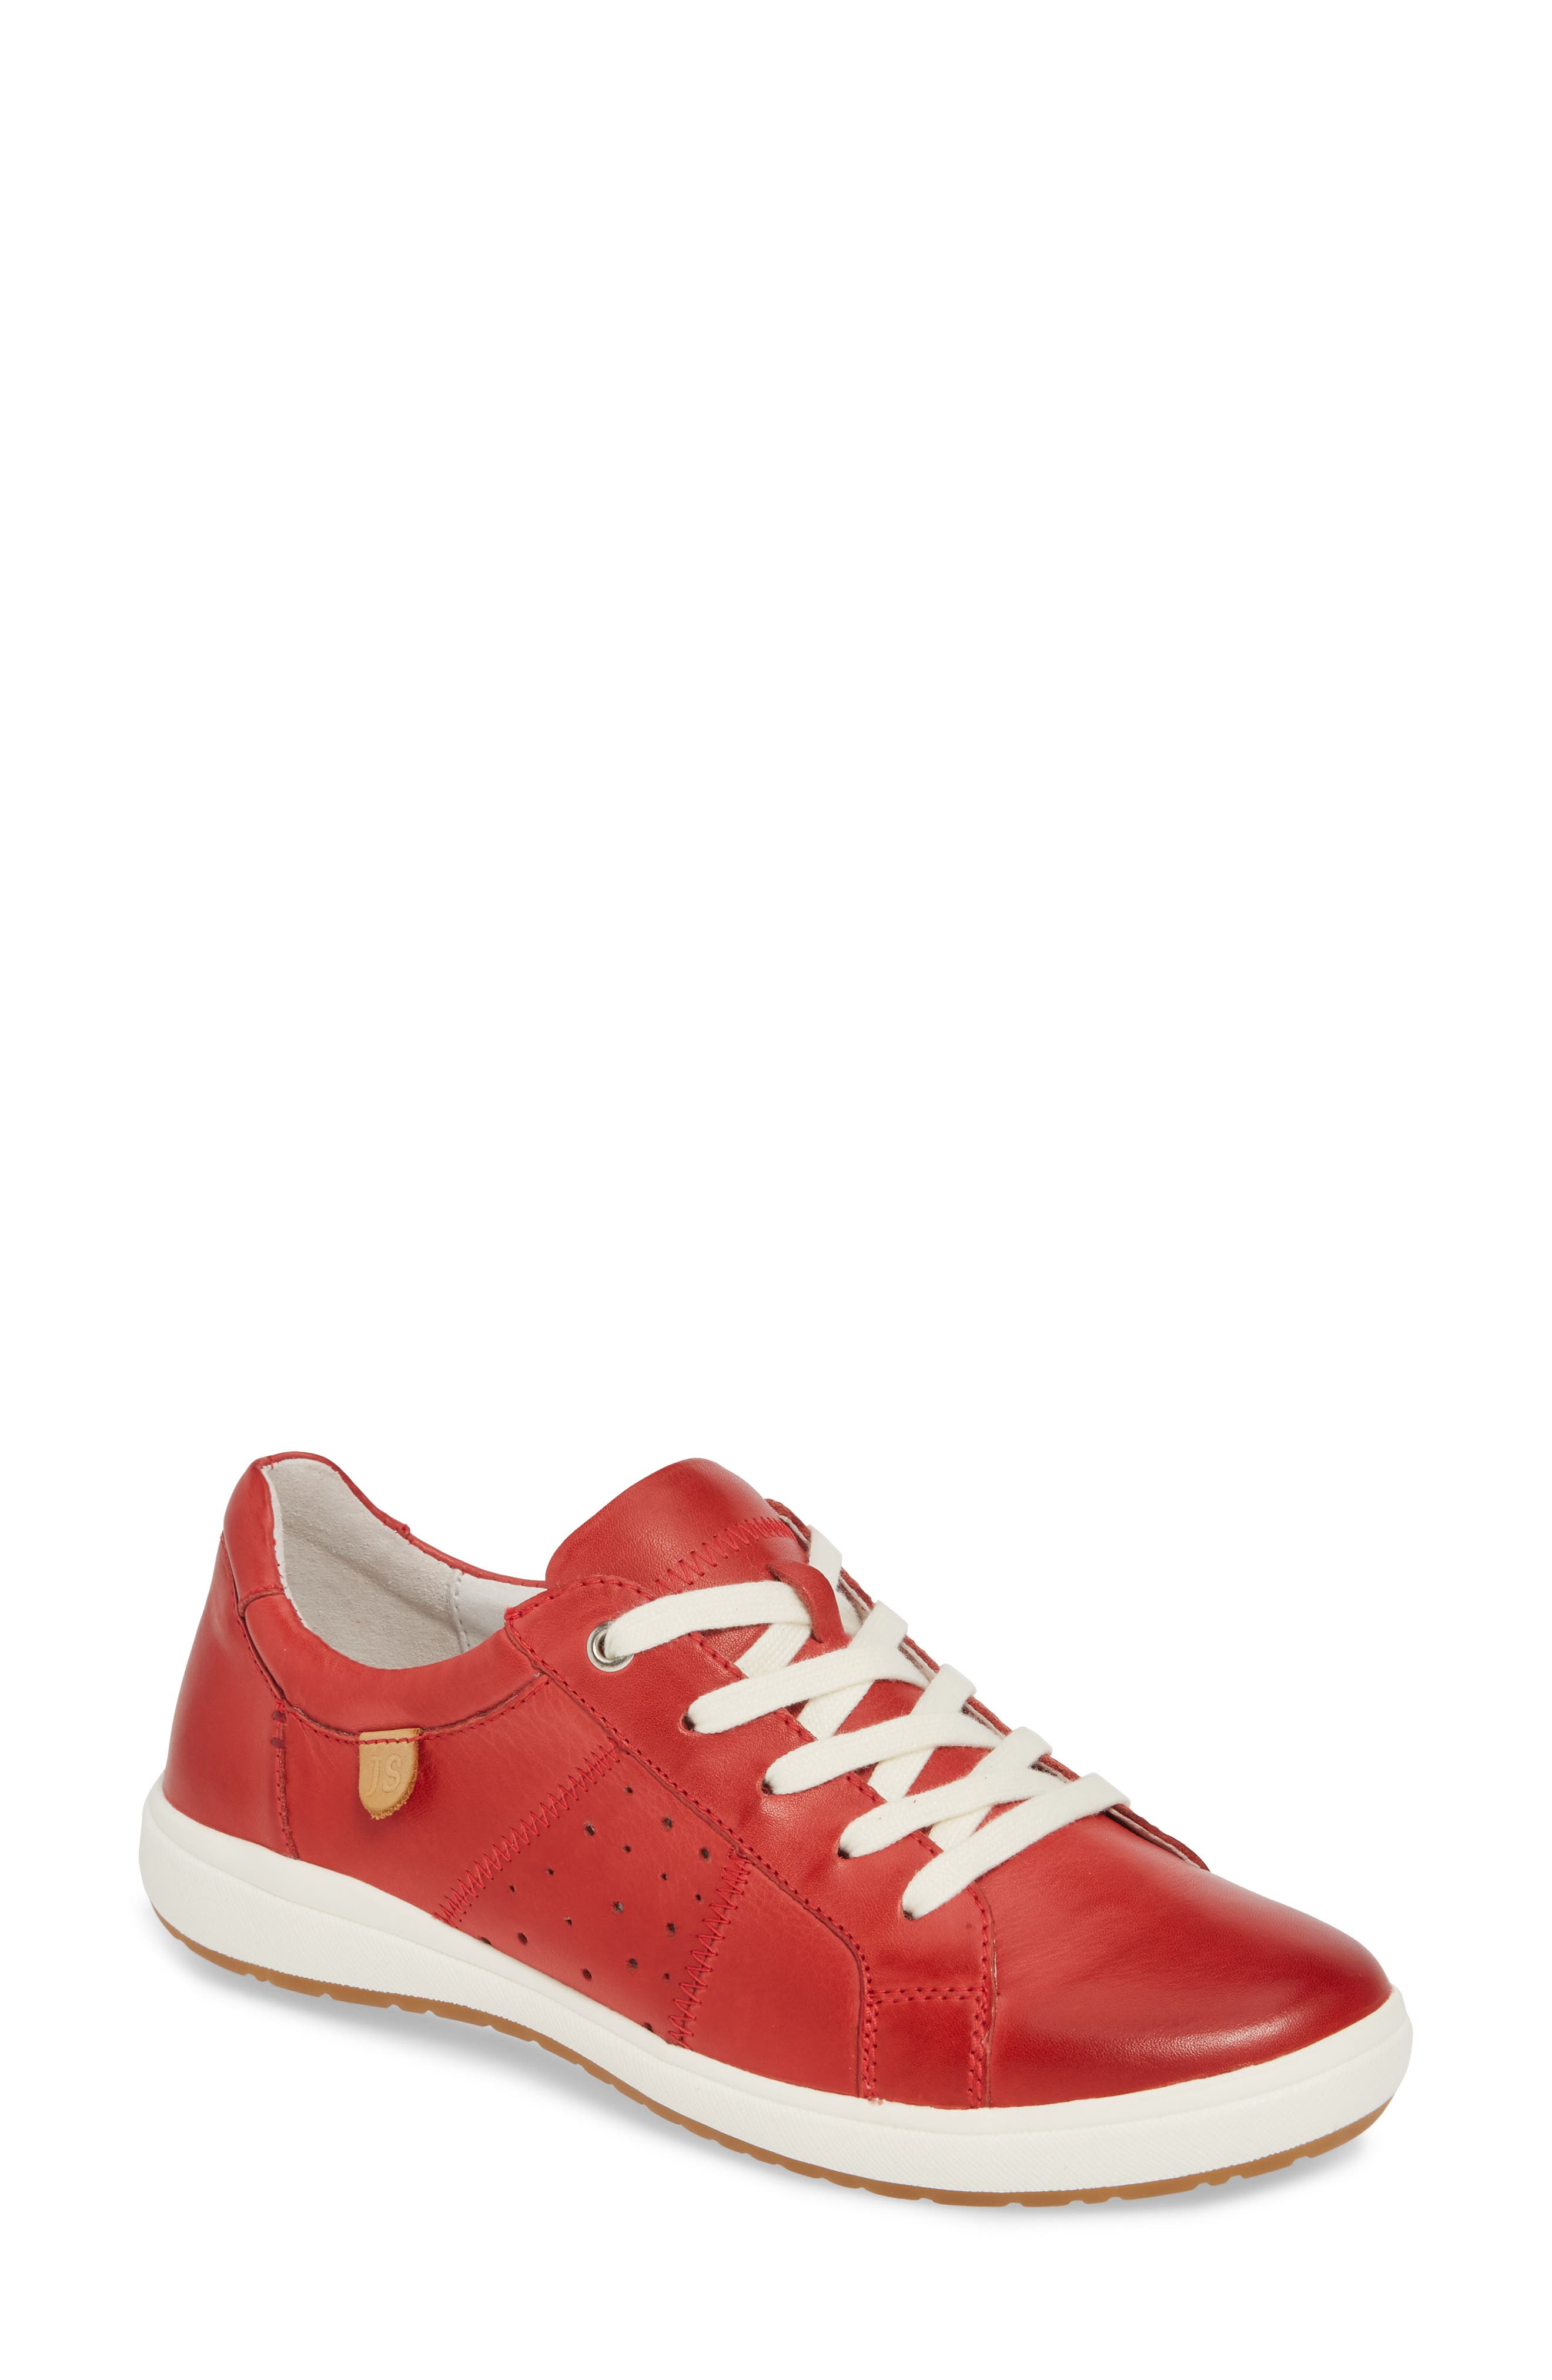 womens red athletic shoes